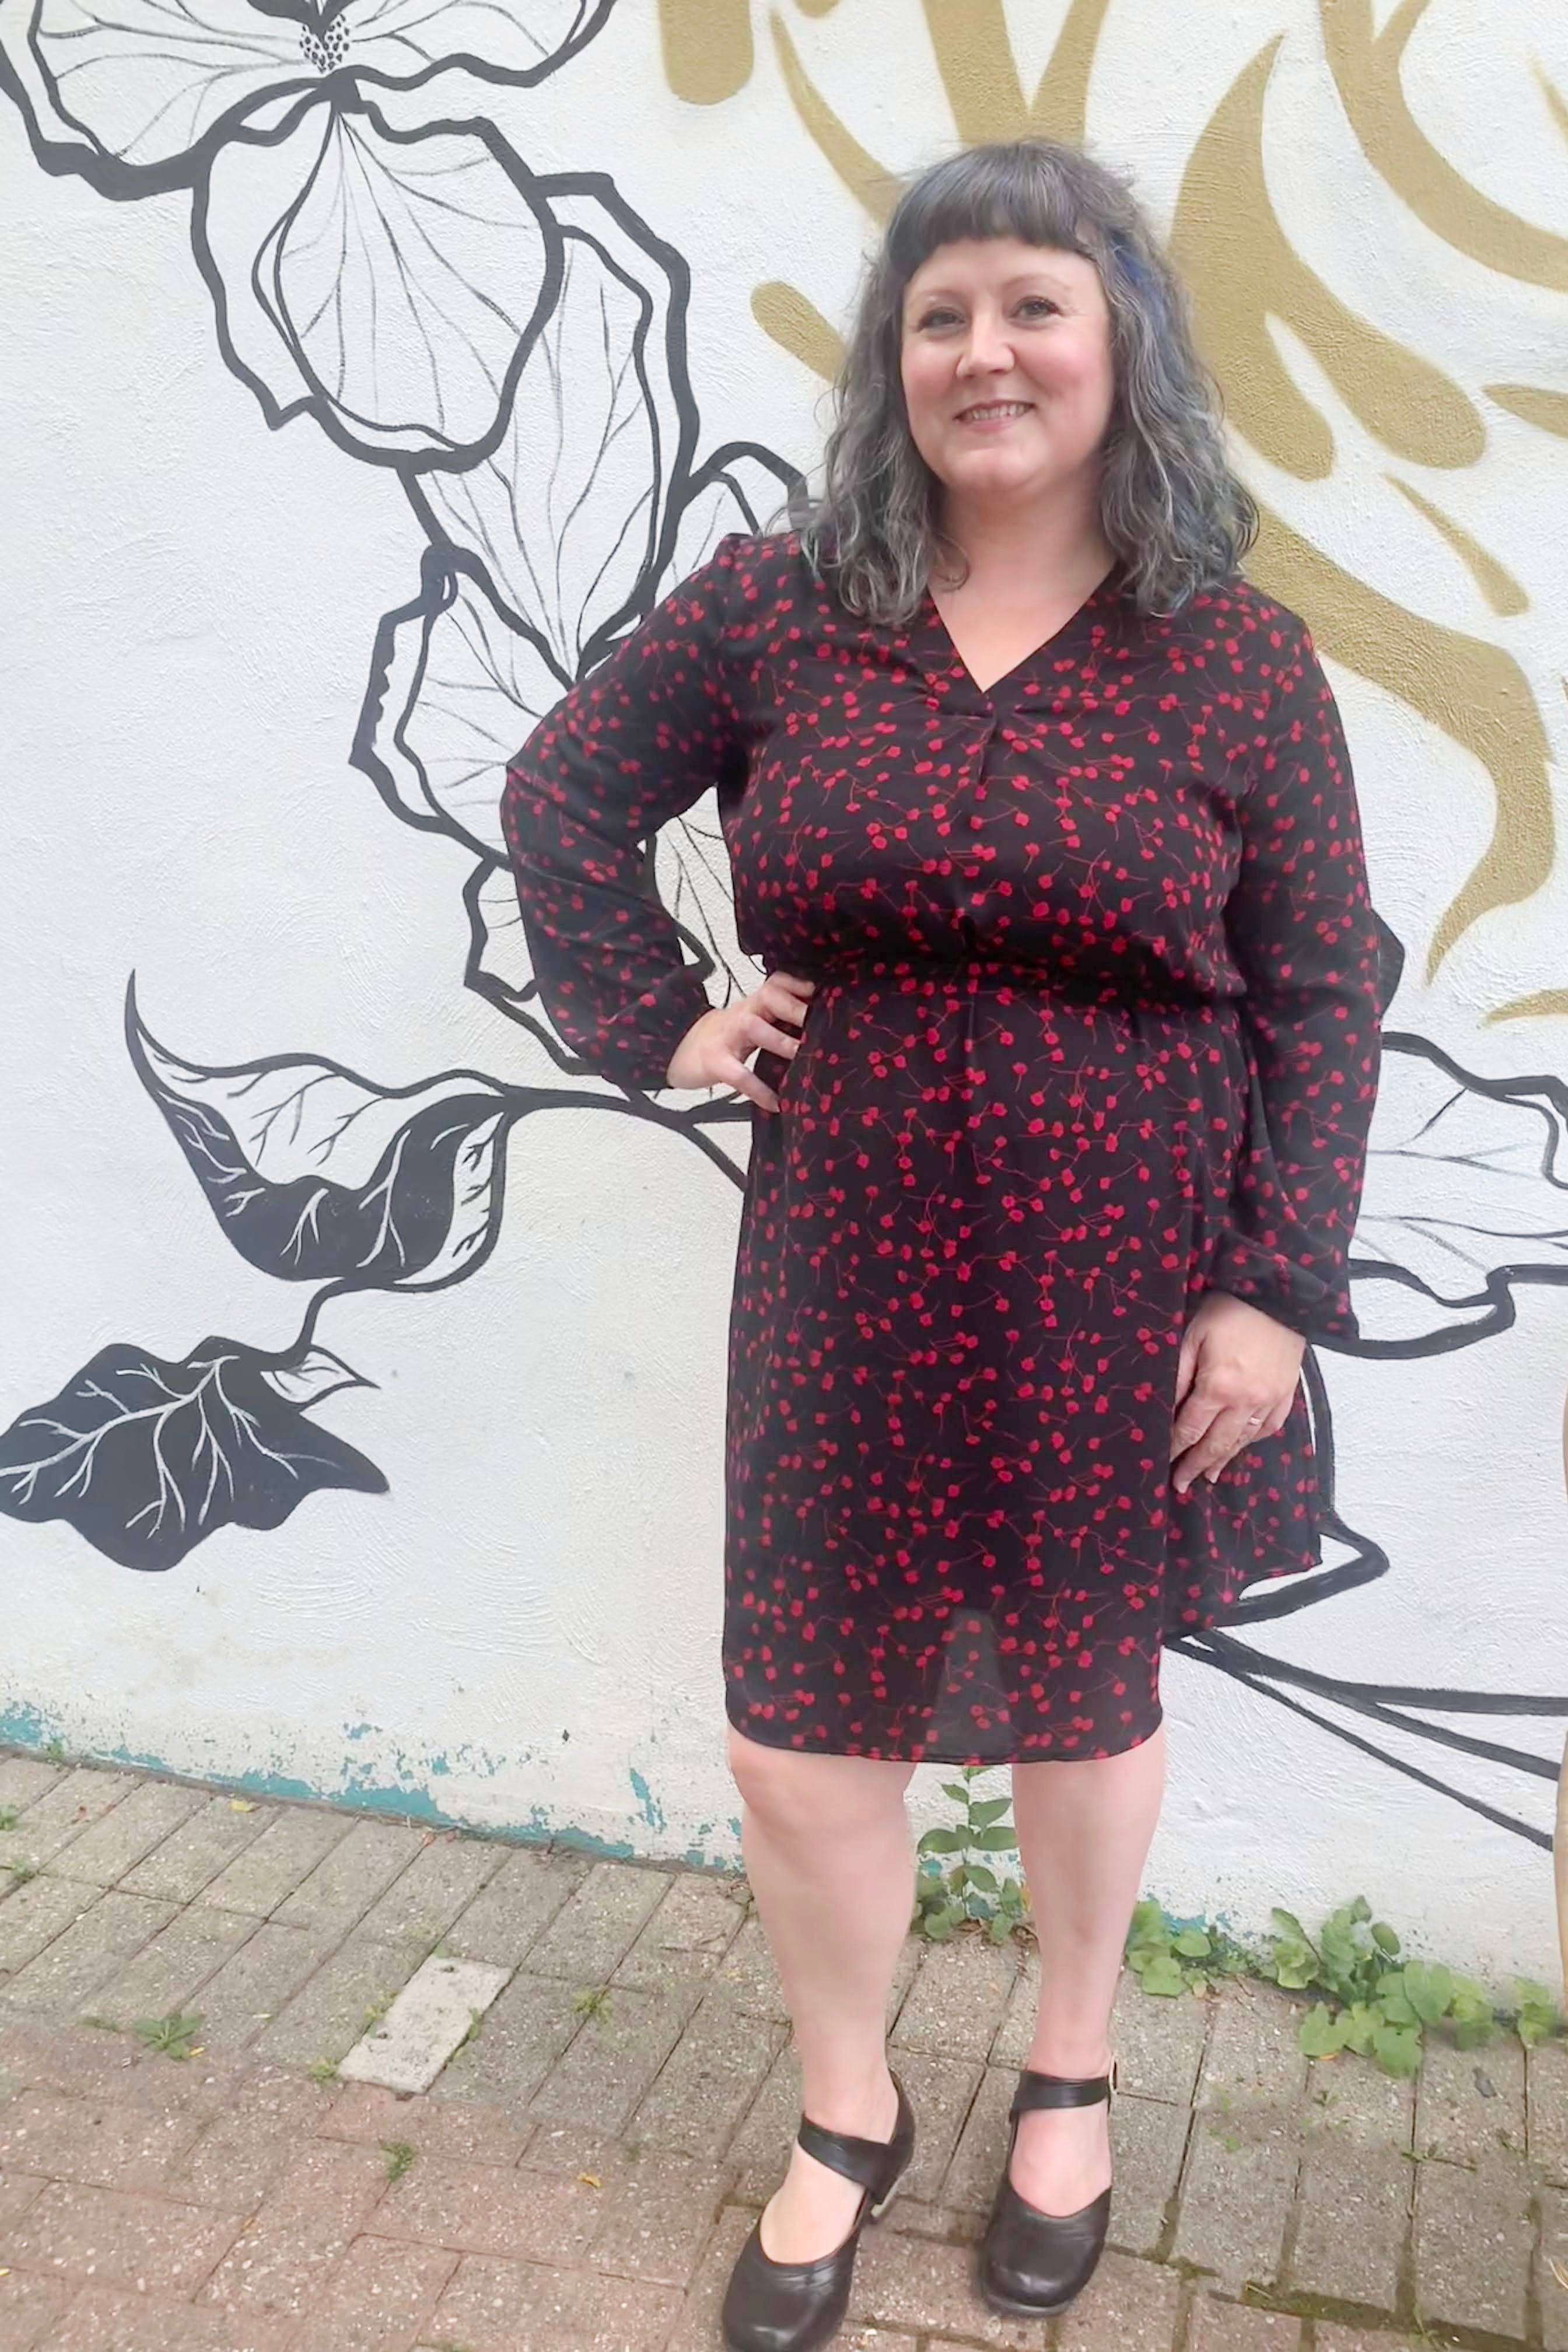 Rosehip Dress by Compli K, Red Floral, black slip dress underlayer, sheer floral overlay, V-neck with placket, long sleeves with gathers at wrists, rounded hem, sizes XS to XXL, made in Canada